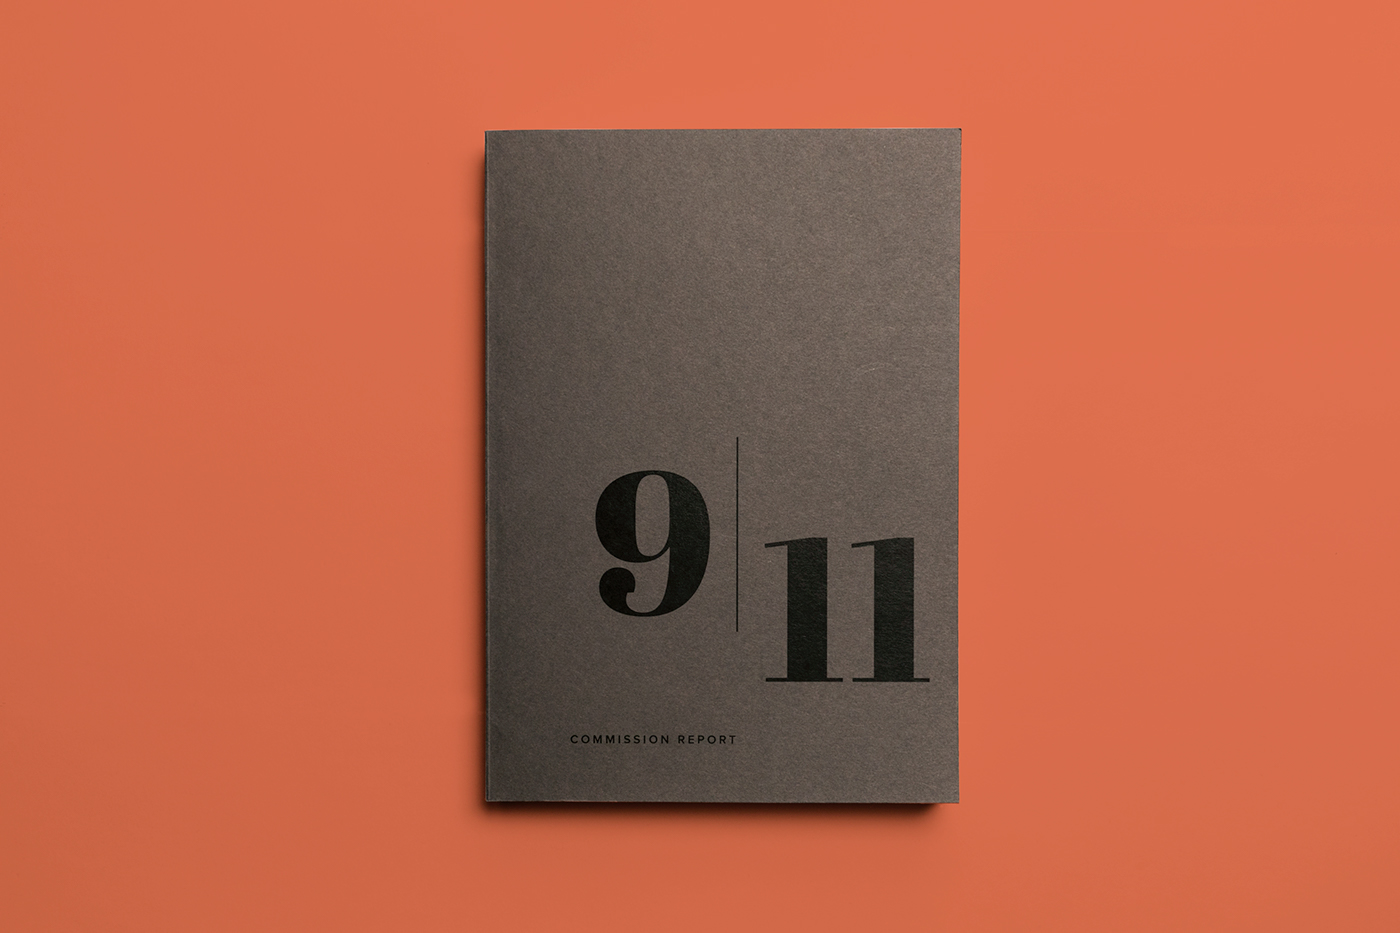 9/11 book design Perfect Binding large scale french paper co Book Cover Design abril abril fat face abril display CCS infographic minimalist design